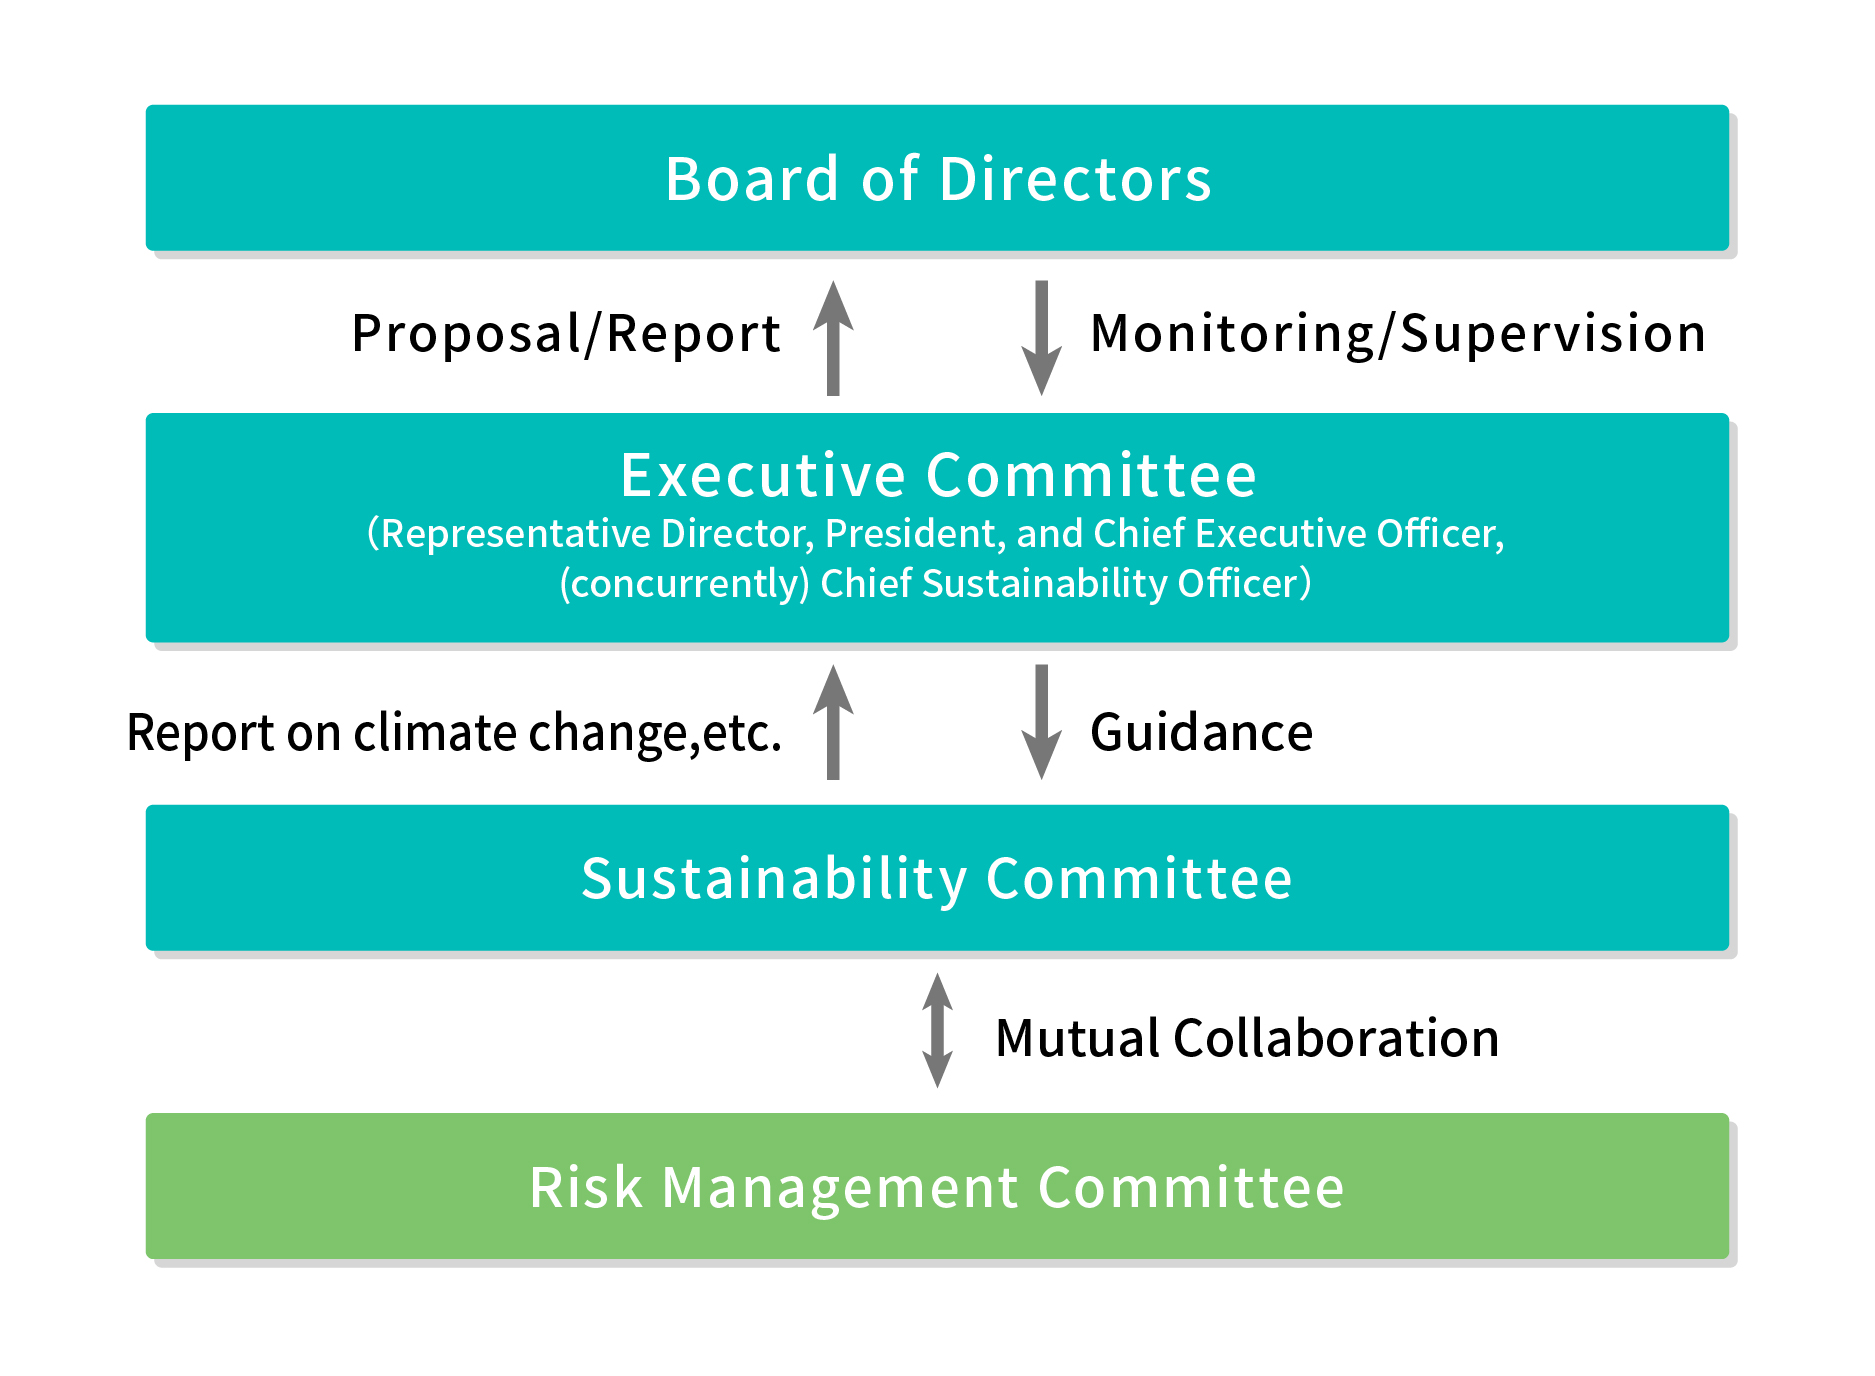 Governance Structure for Climate Change Issues